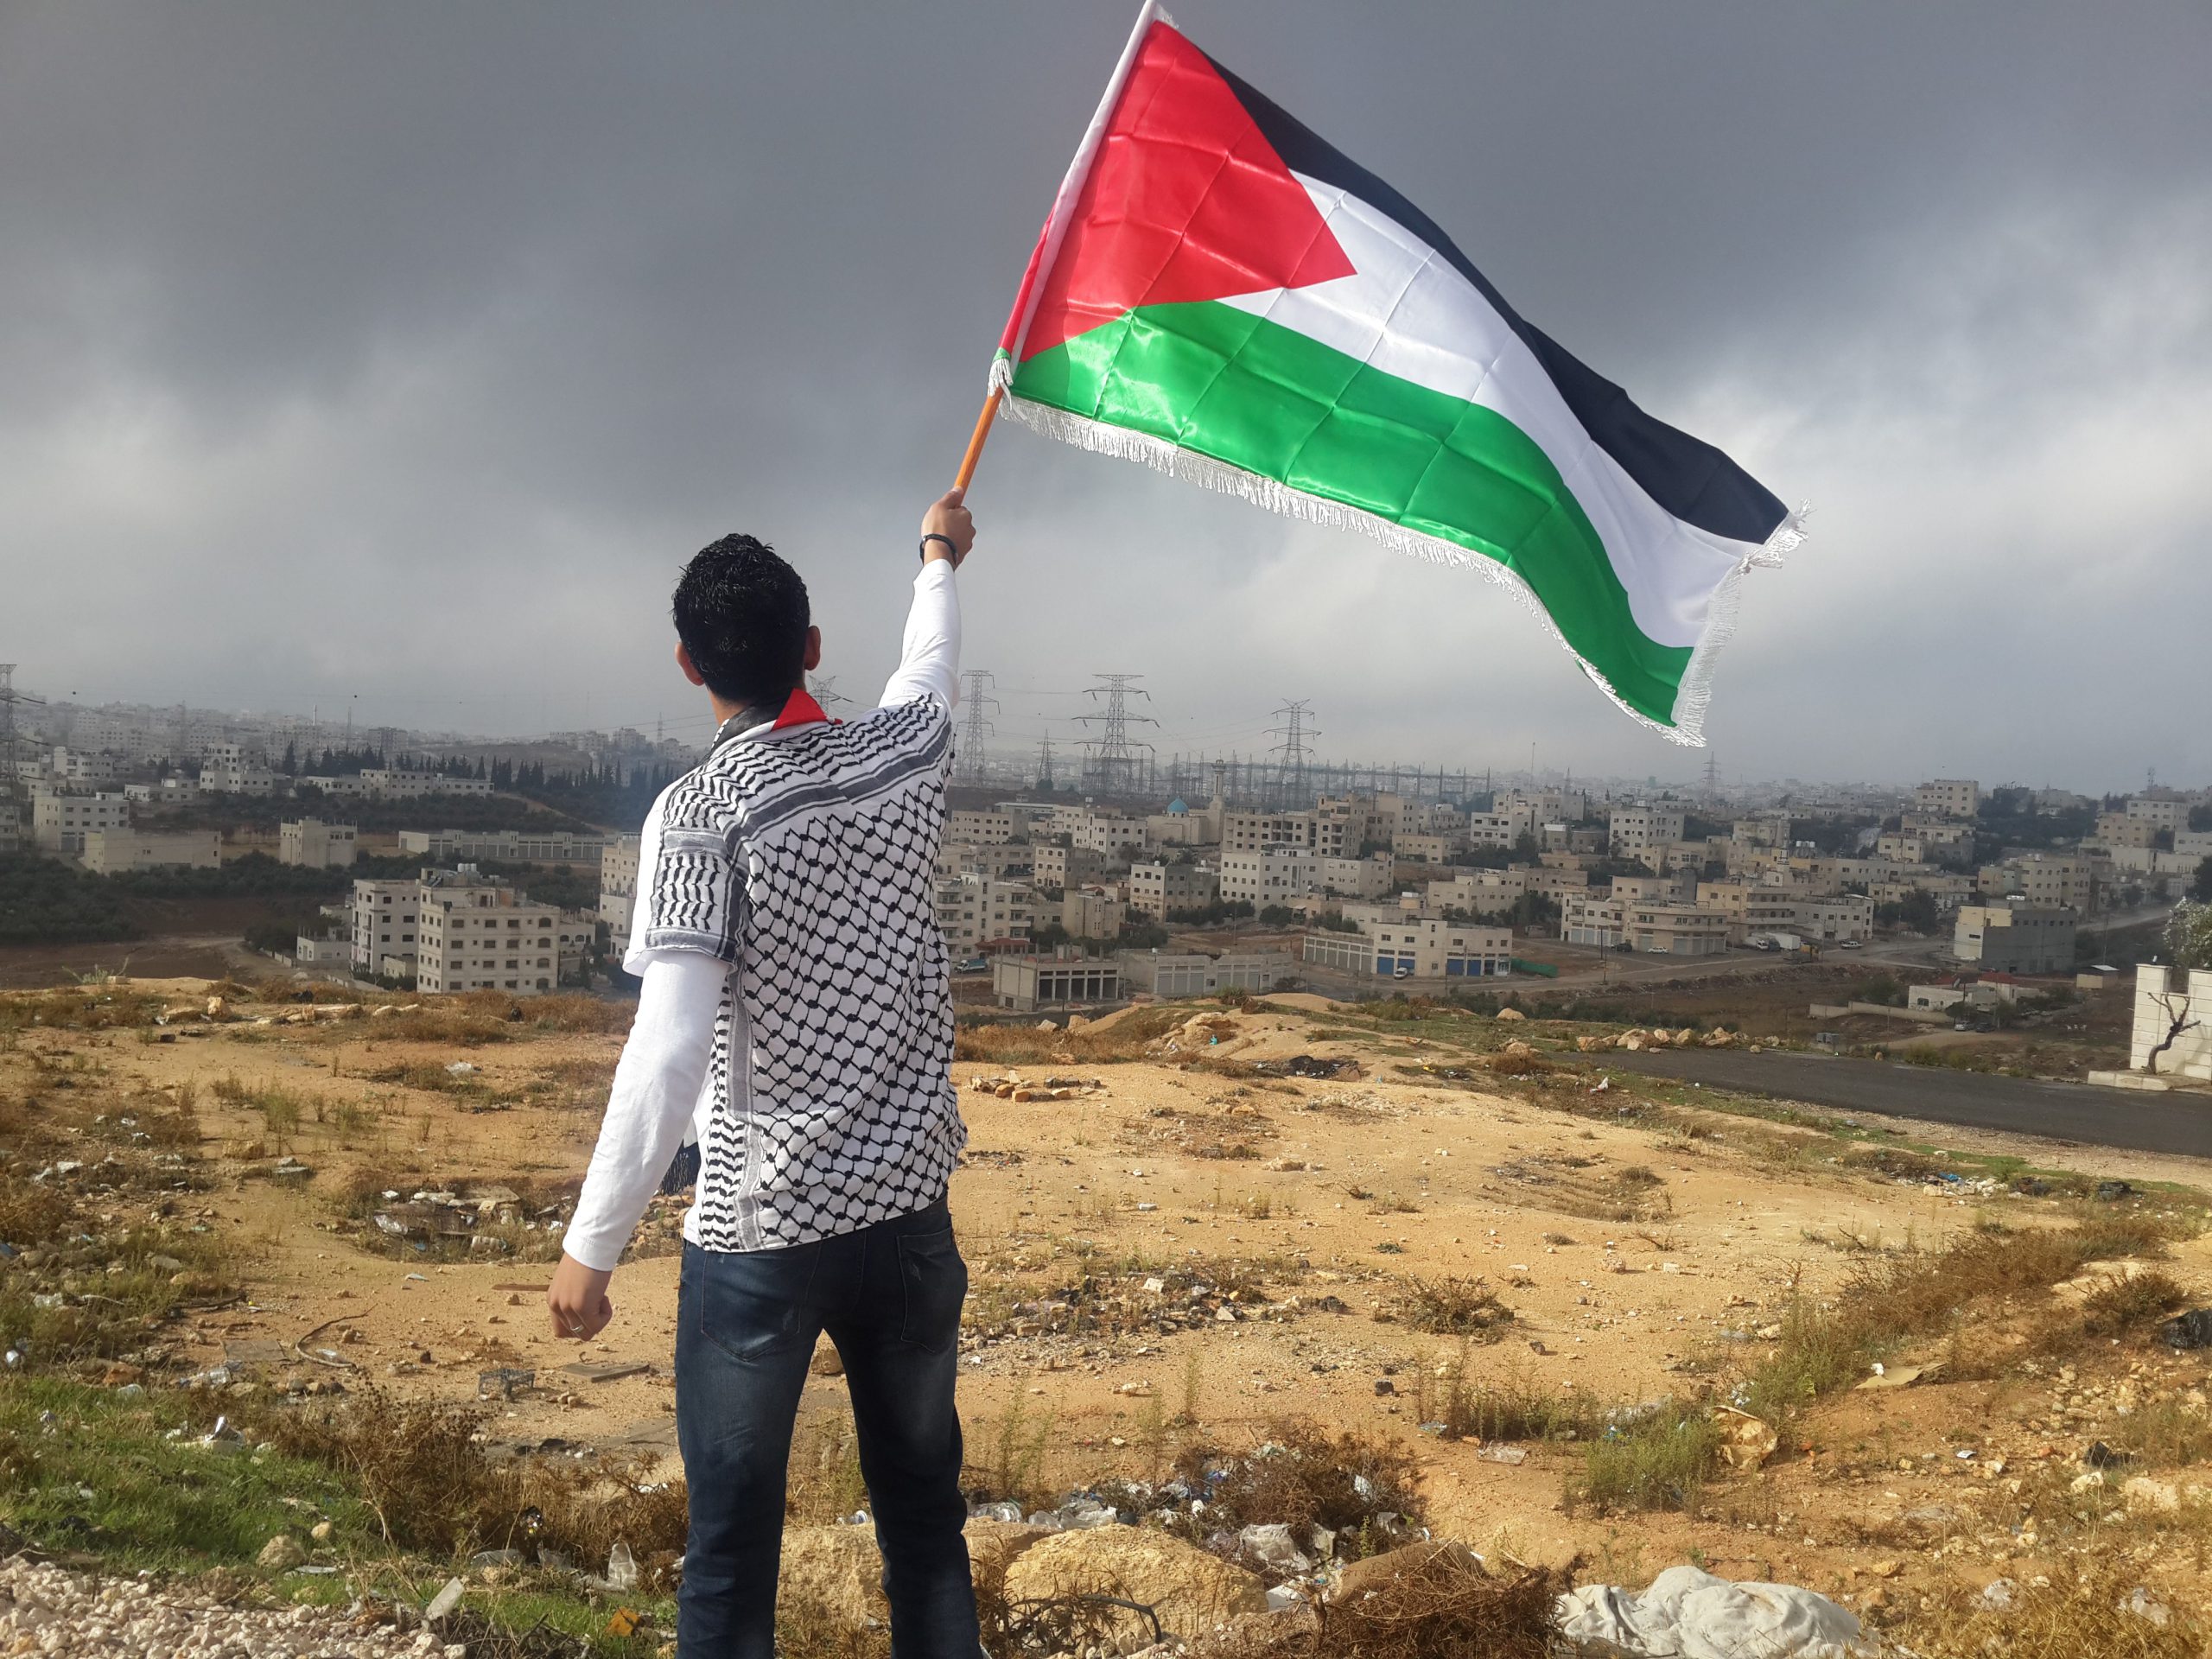 Young Palestinian Waving the flag - Article Image